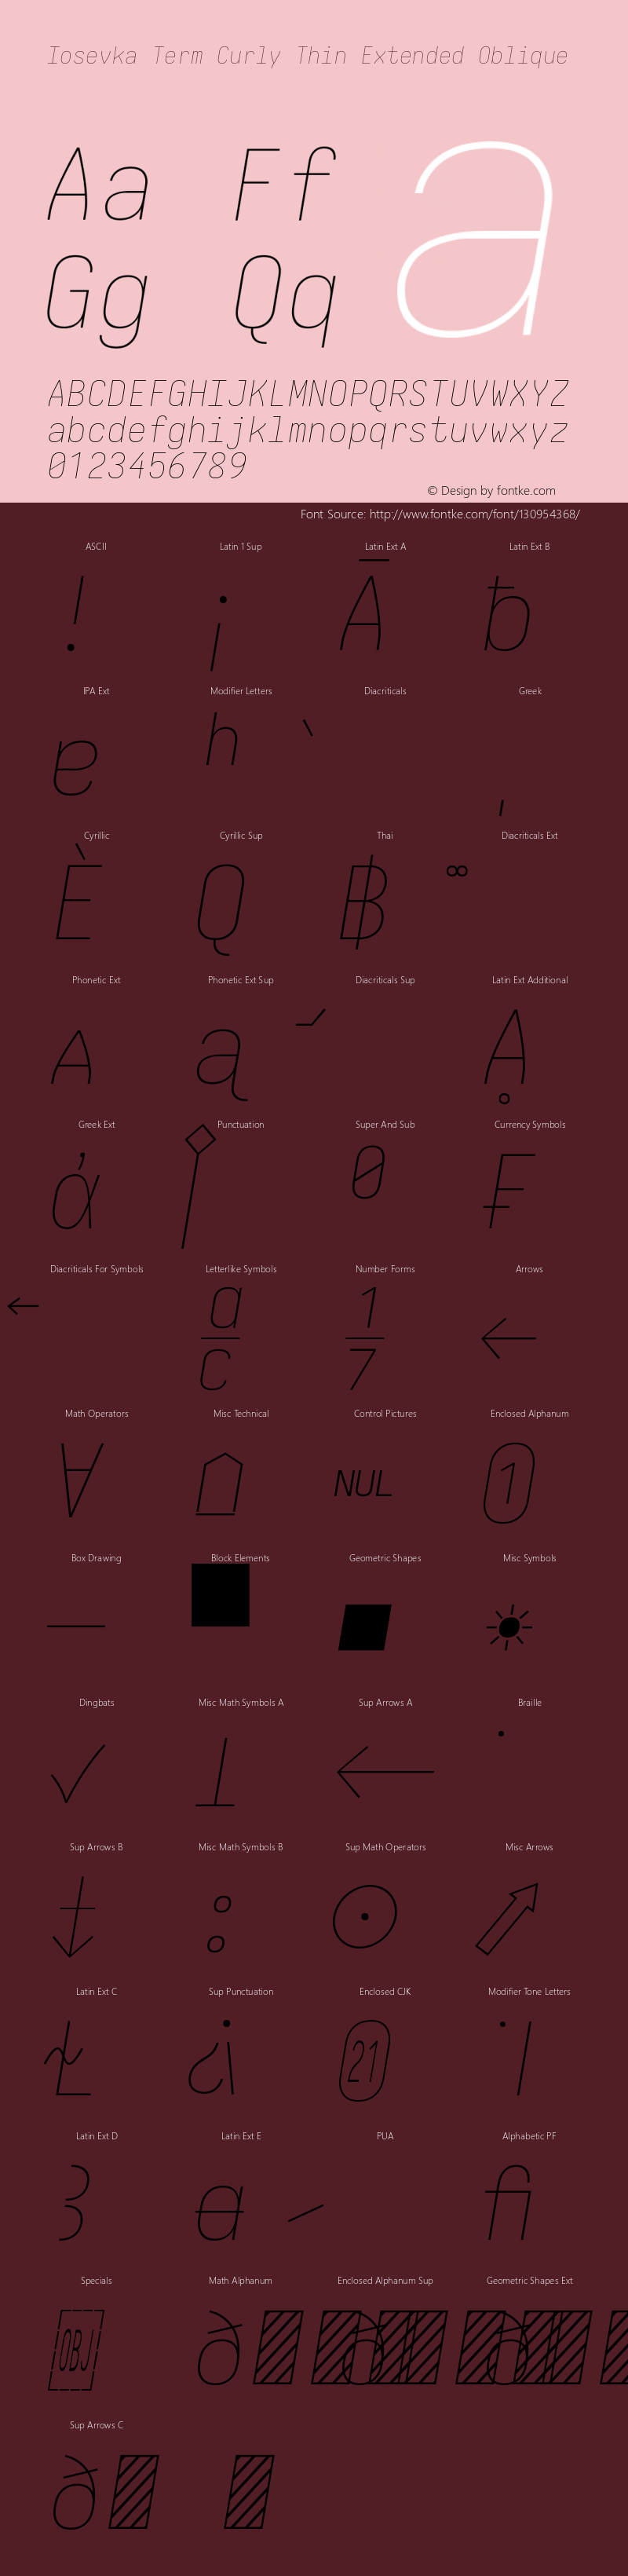 Iosevka Term Curly Thin Extended Oblique Version 5.0.8 Font Sample